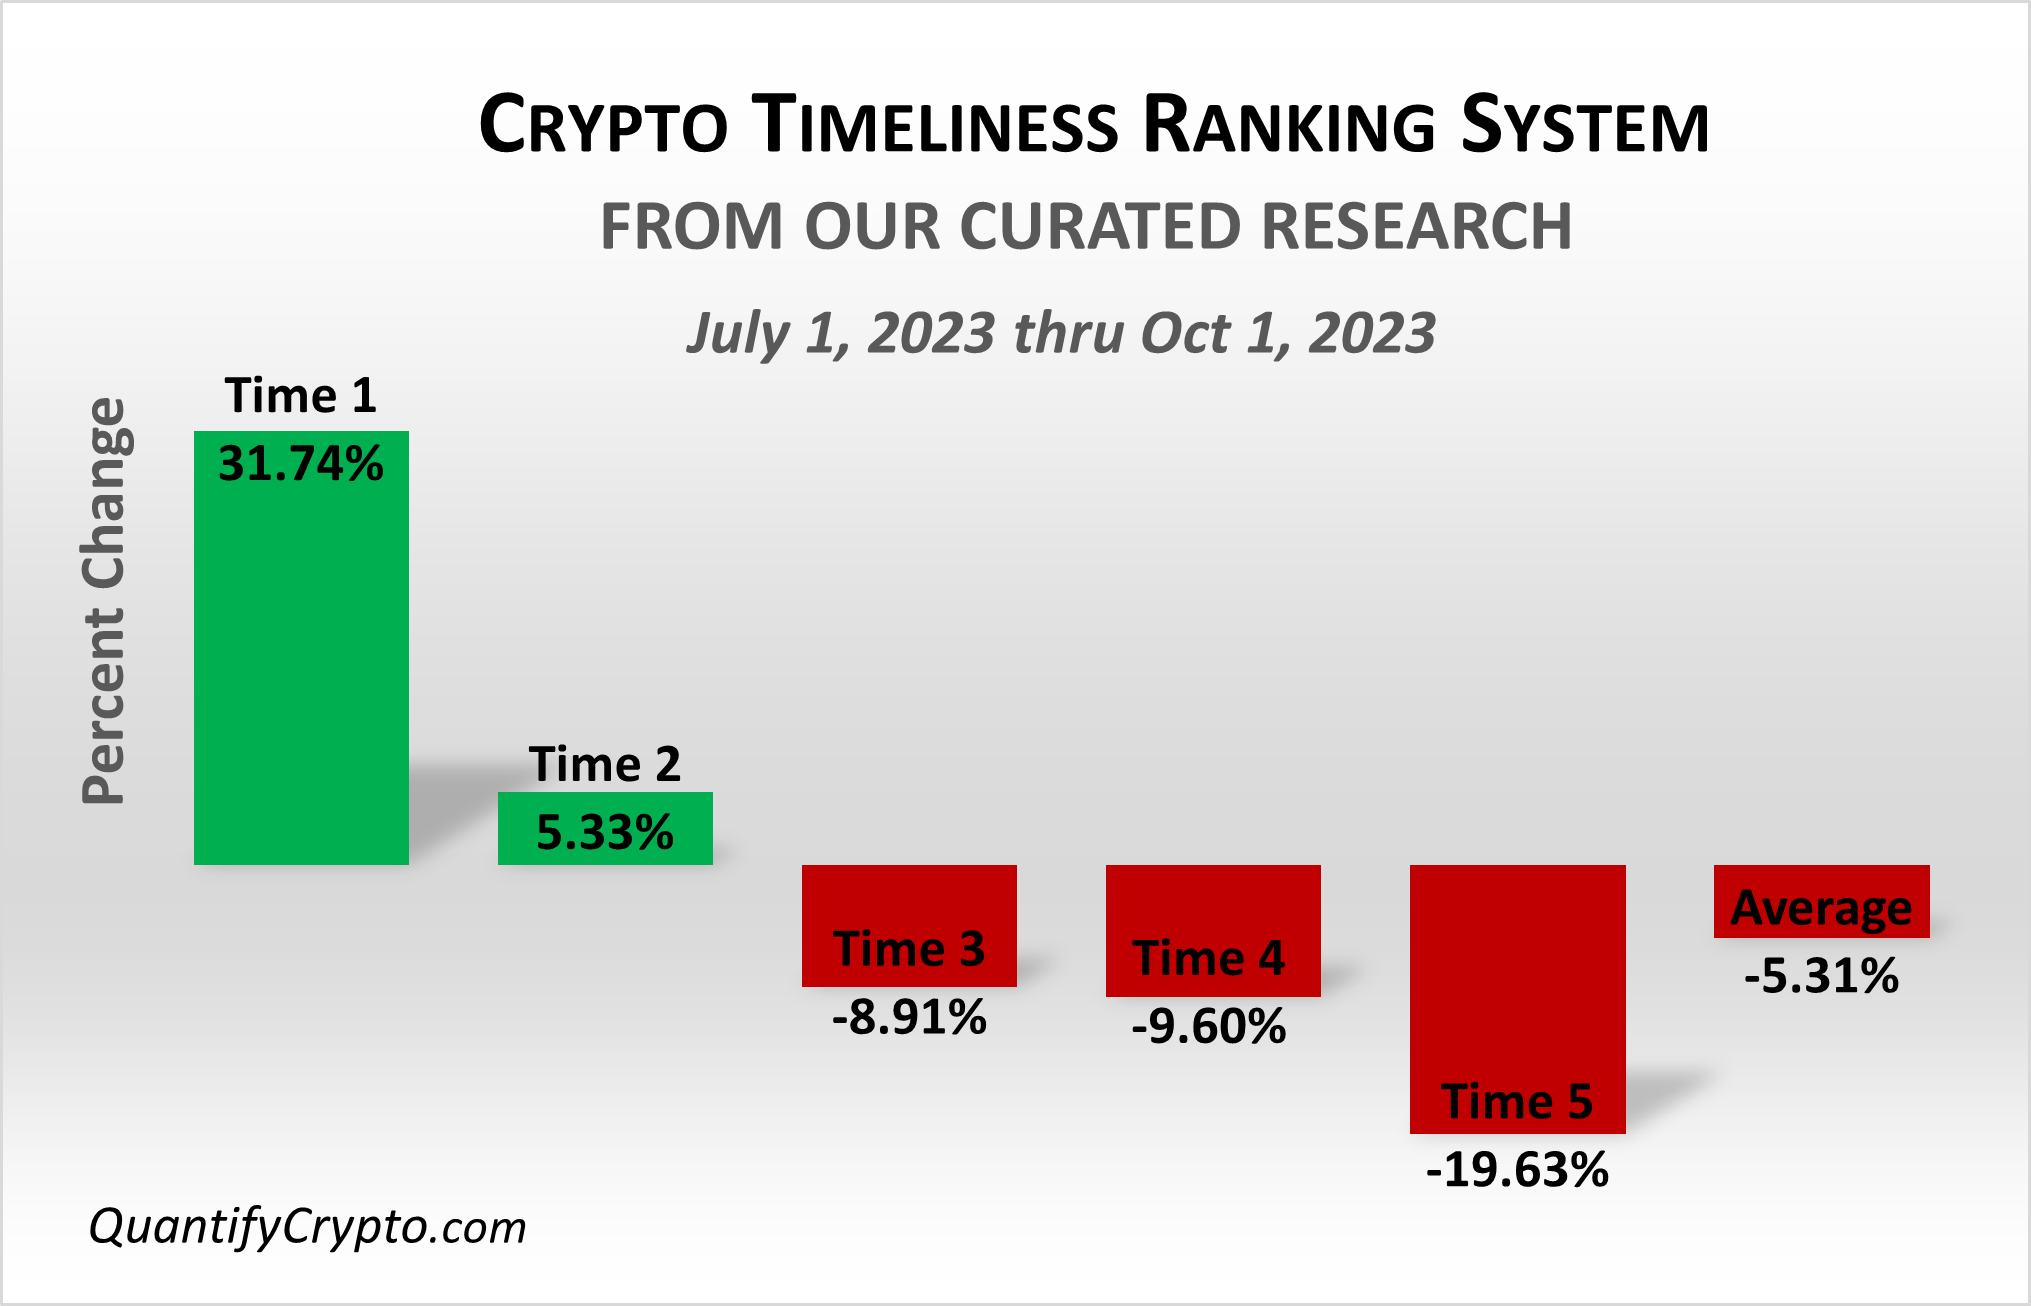 Quantify Crypto Timeliness Performance Chart - Showing Timeliness 1 performs best and Timeliness 5 has the worse performance